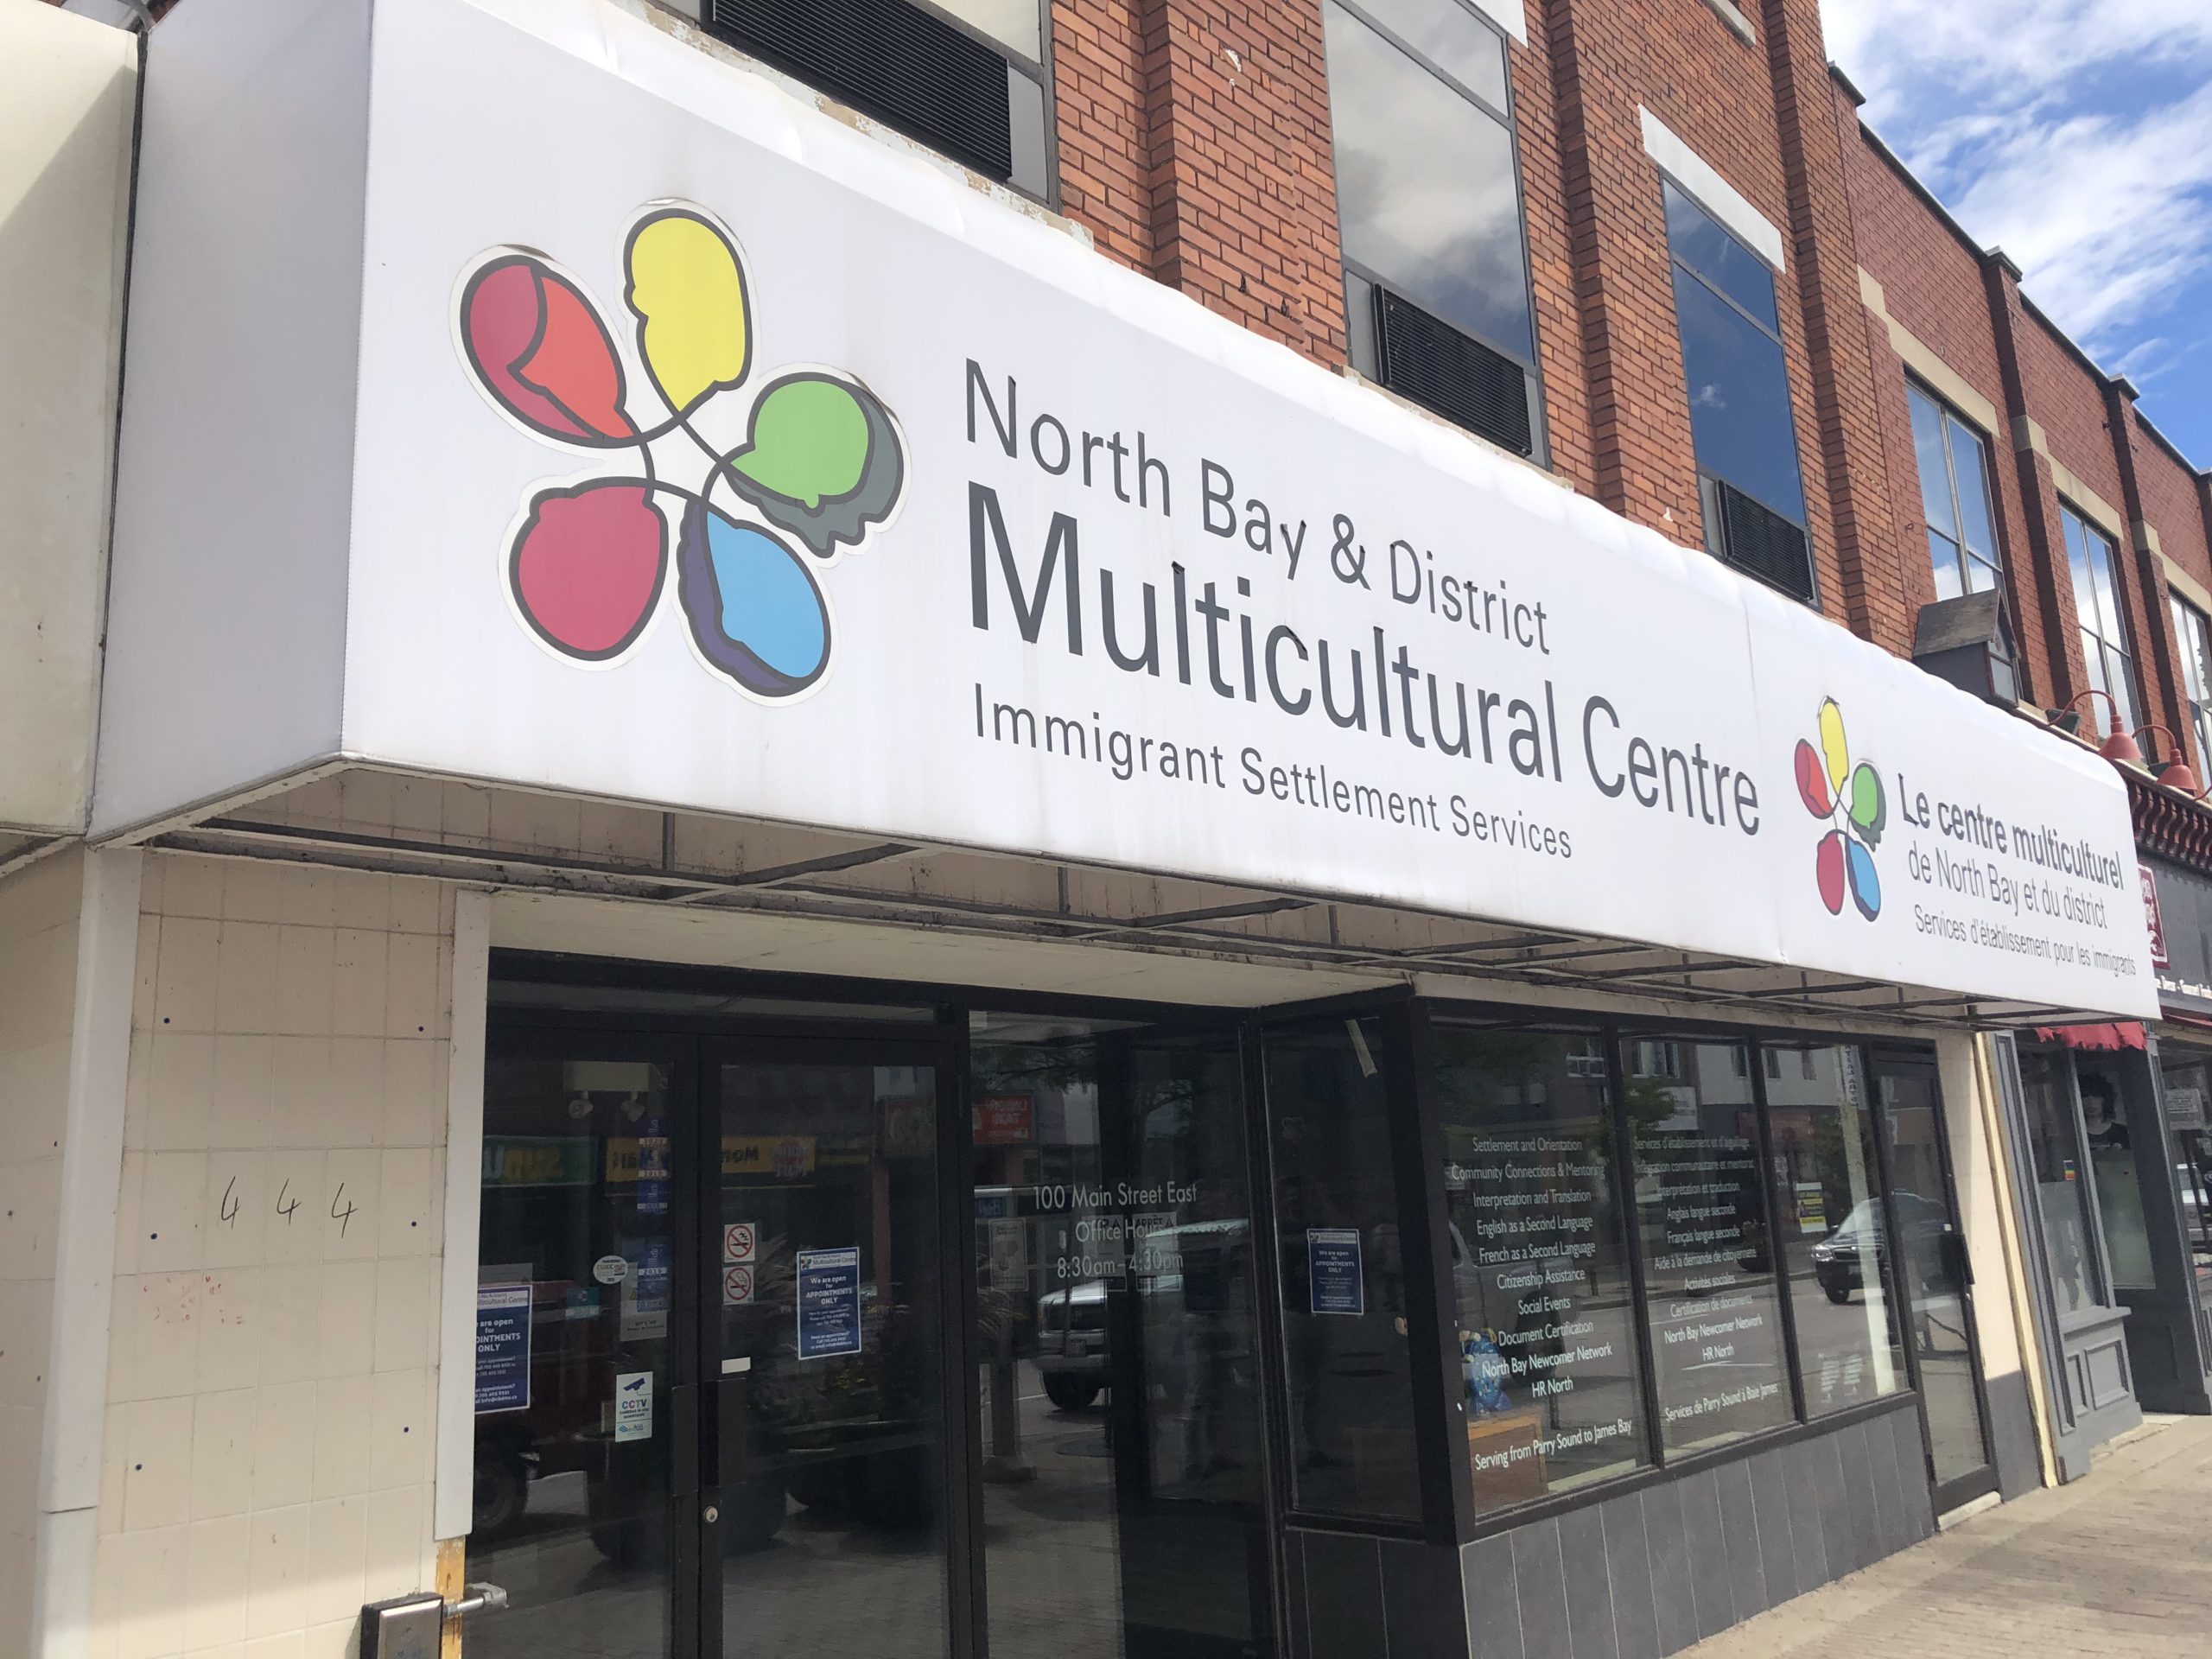 The North Bay & District Multicultural Centre